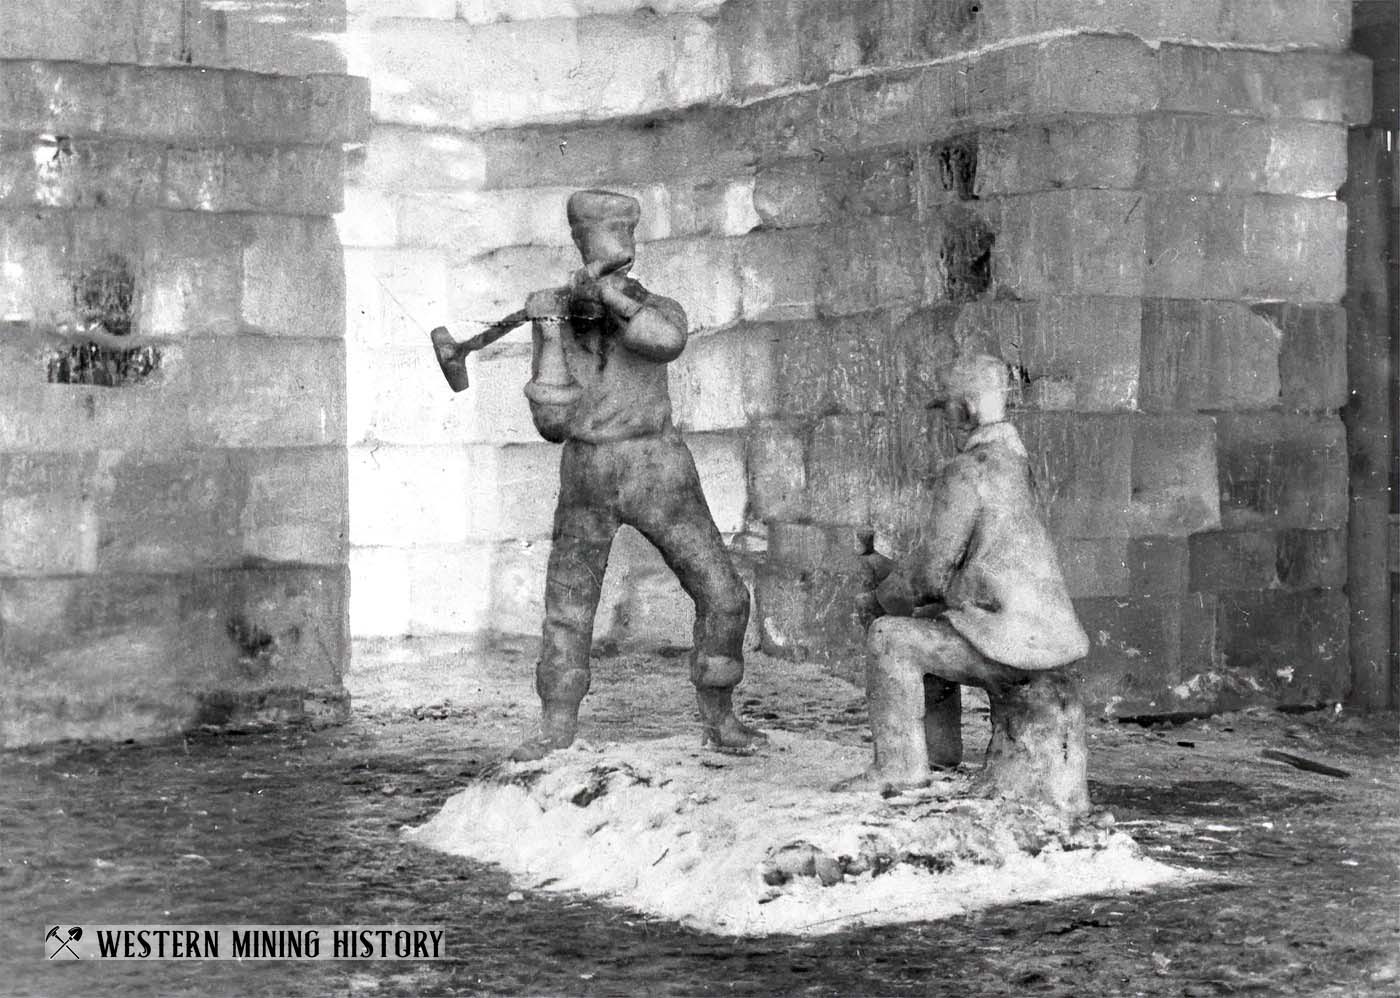 Sculpture of miners at the Leadville Ice Palace